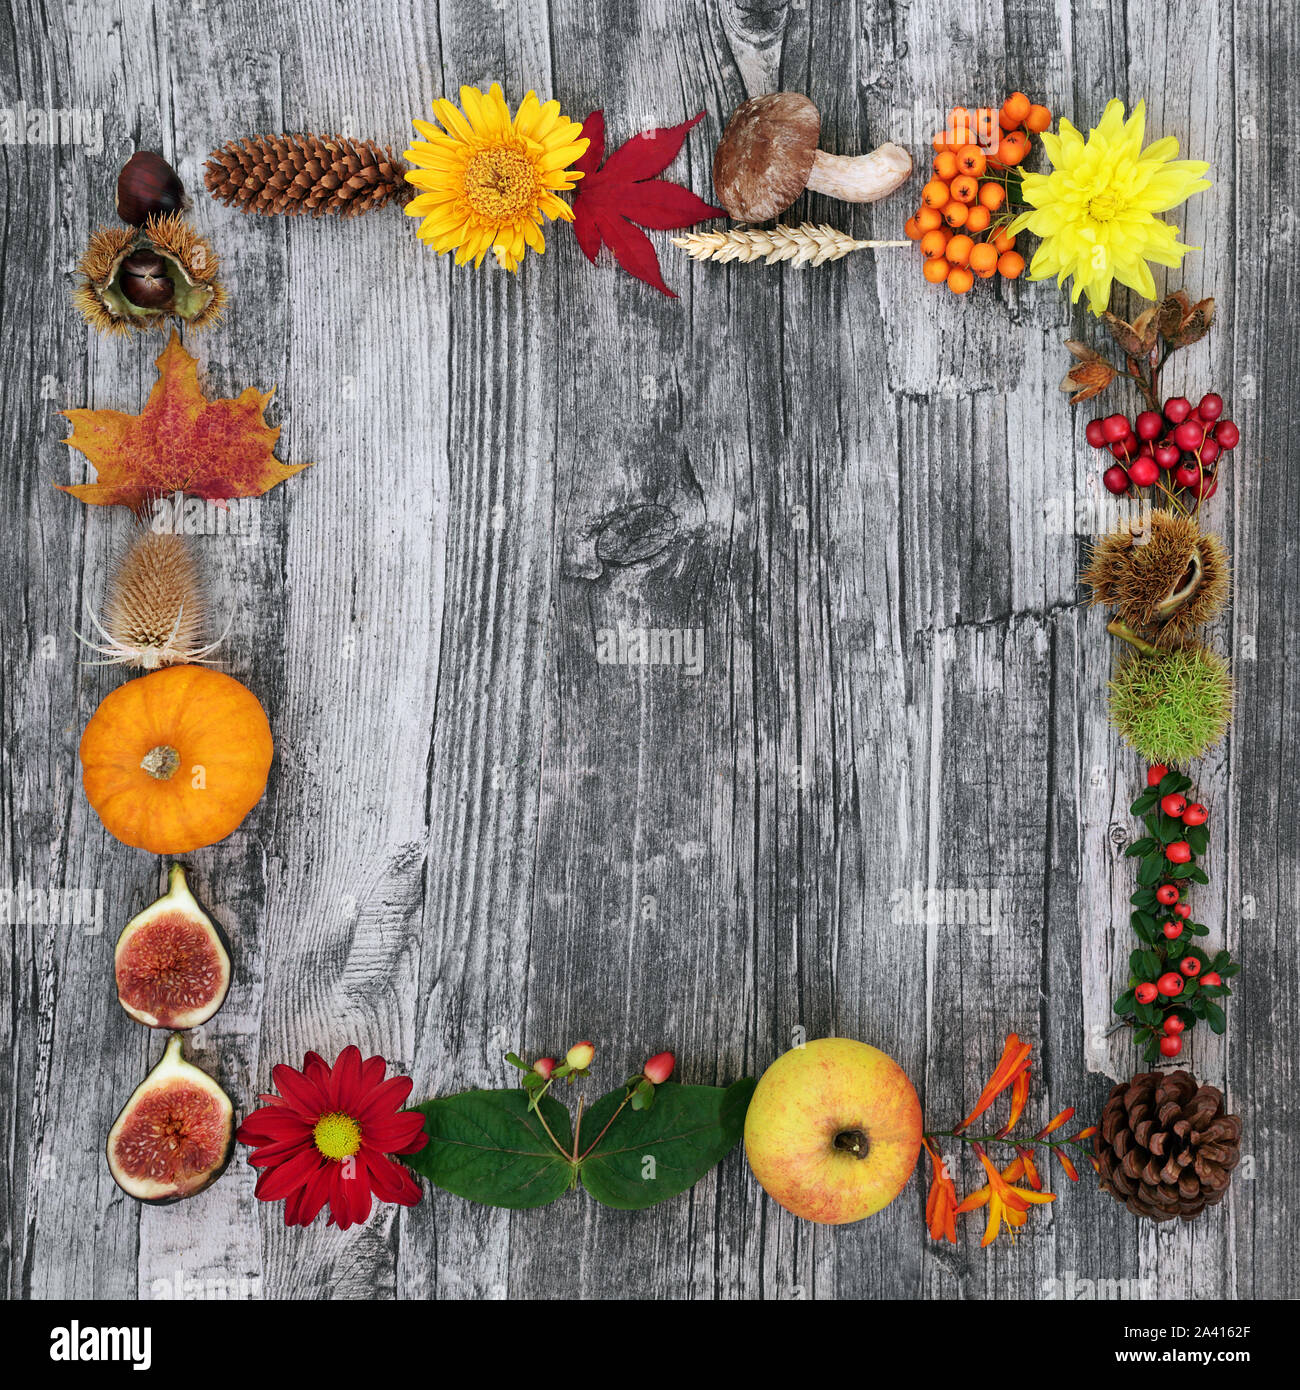 Autumn harvest festival border composition with a variety of natural flora and food on rustic driftwood background. Stock Photo